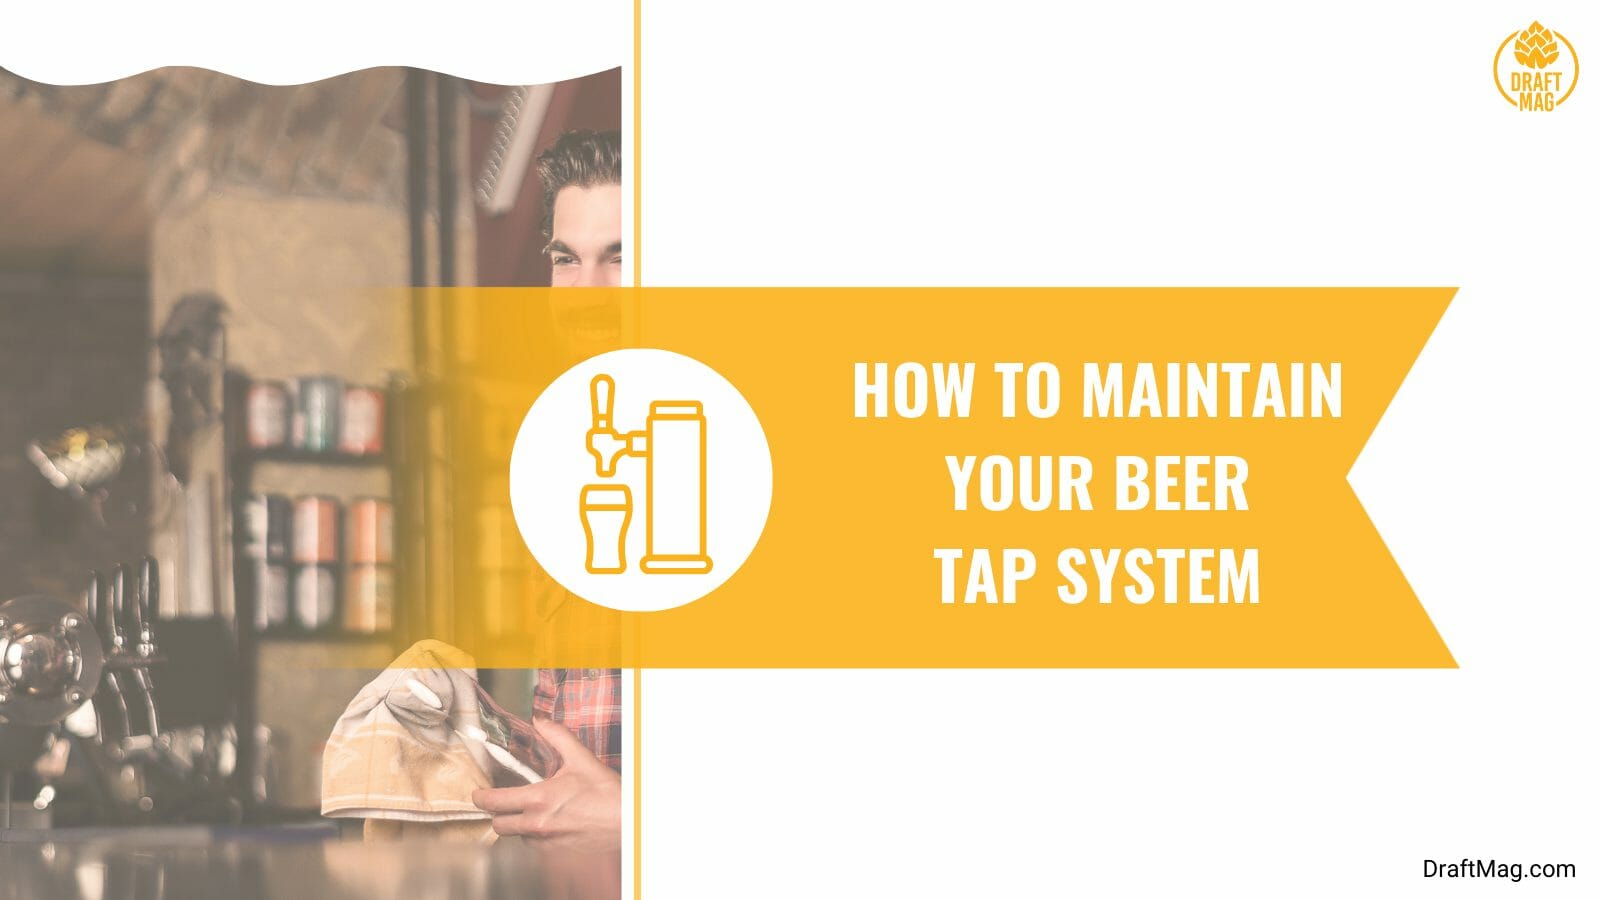 Maintain your beer tap system